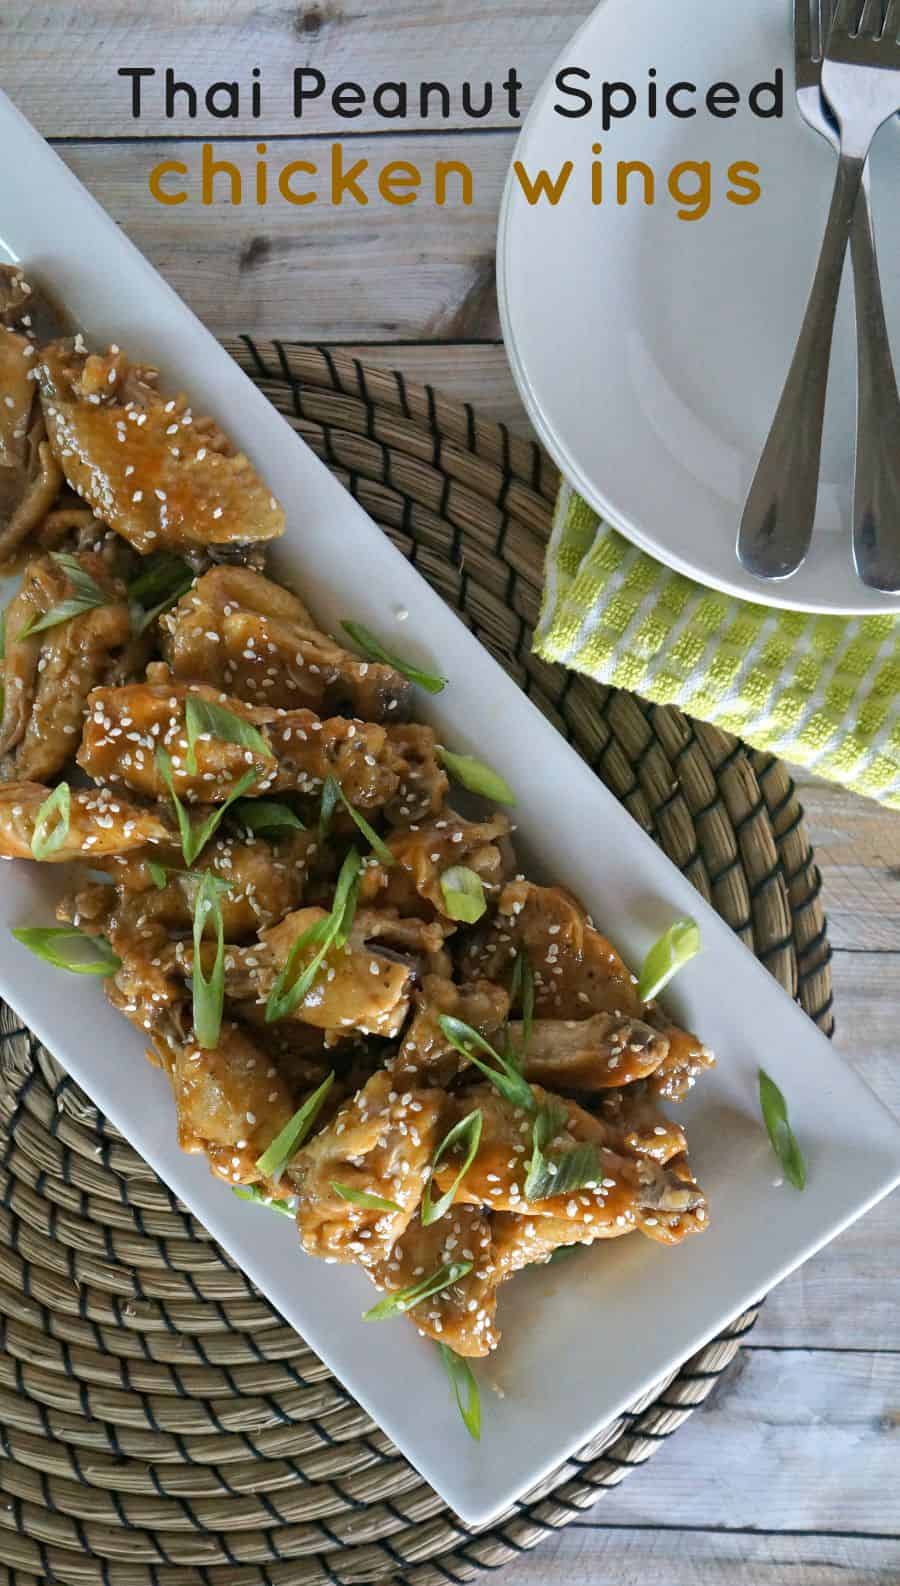 Thai-Peanut-Spiced-Chicken-Wings-A-Slow-Cooker-Recipe